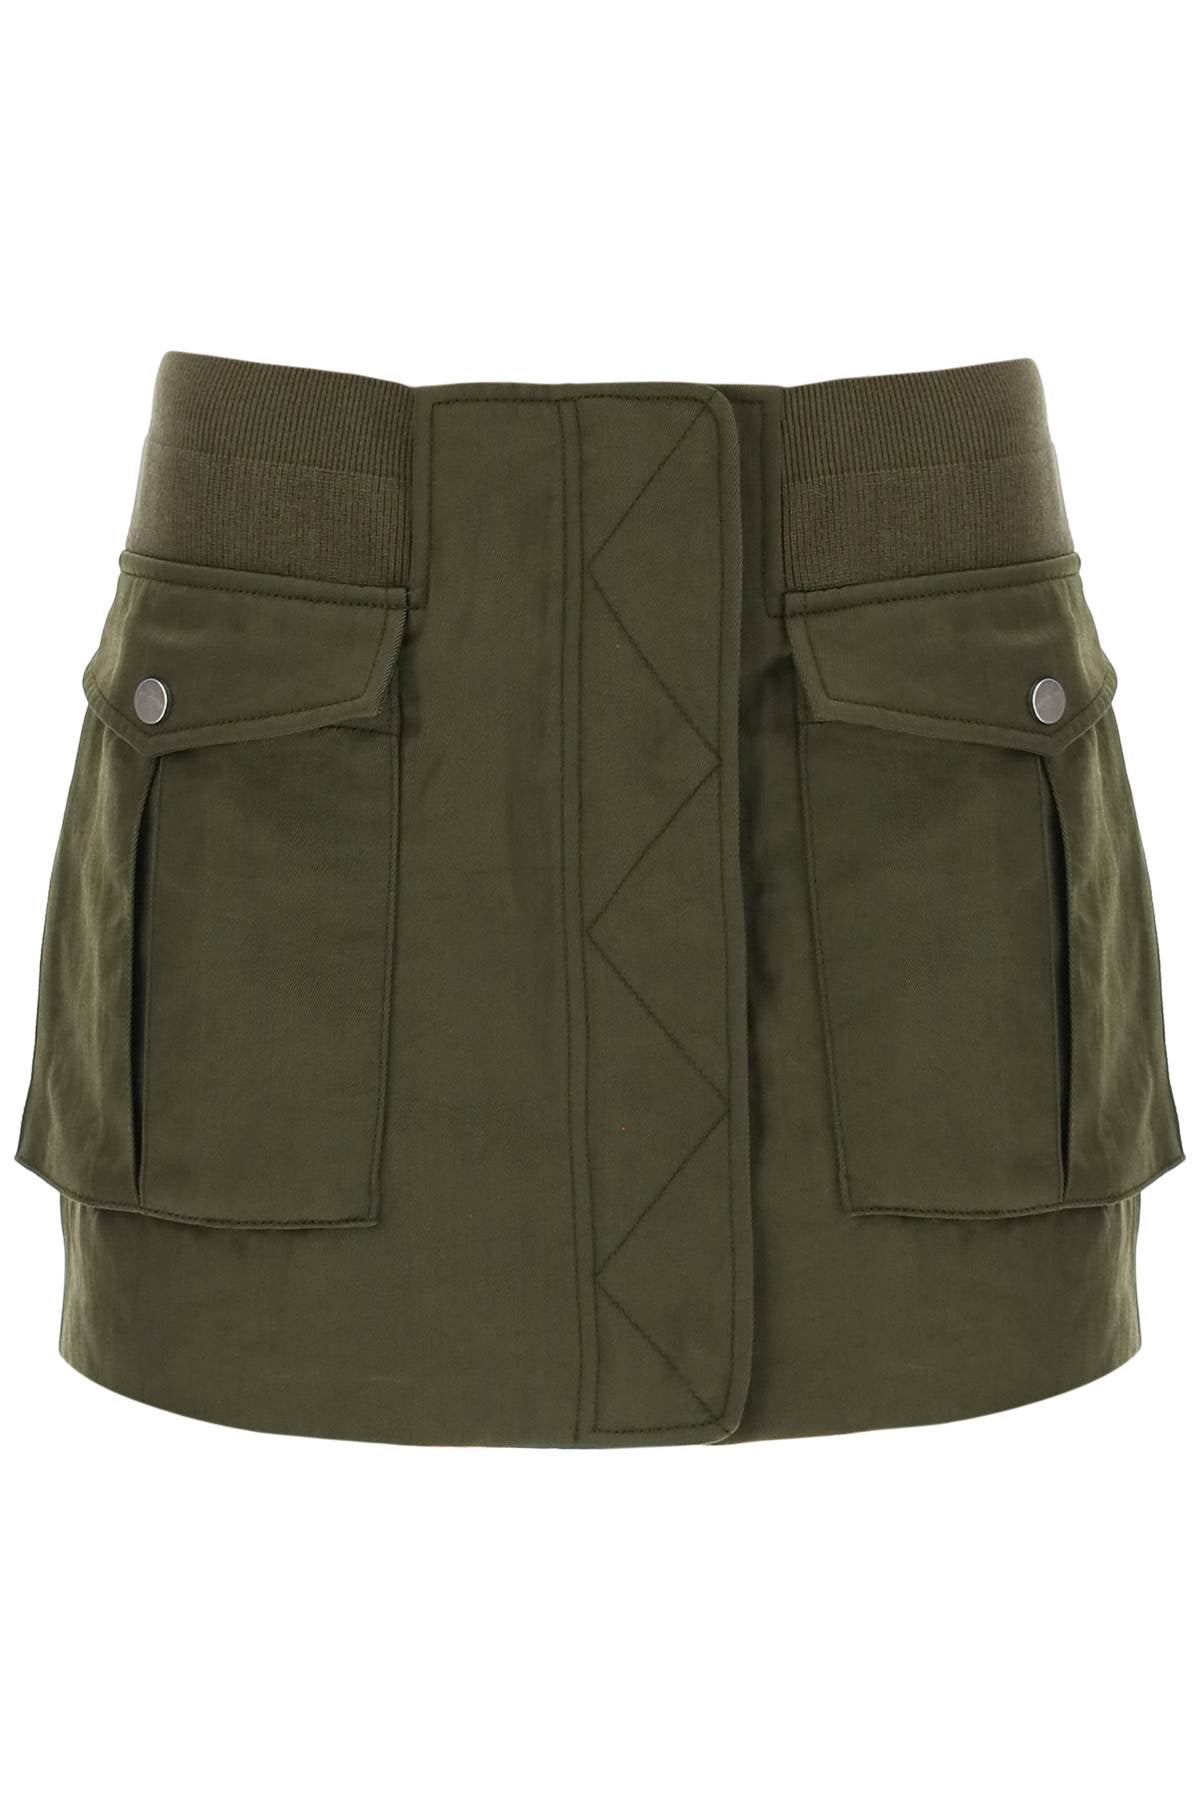 Dion lee twill bomber mini skirt A1404R23 MILITARY GREEN